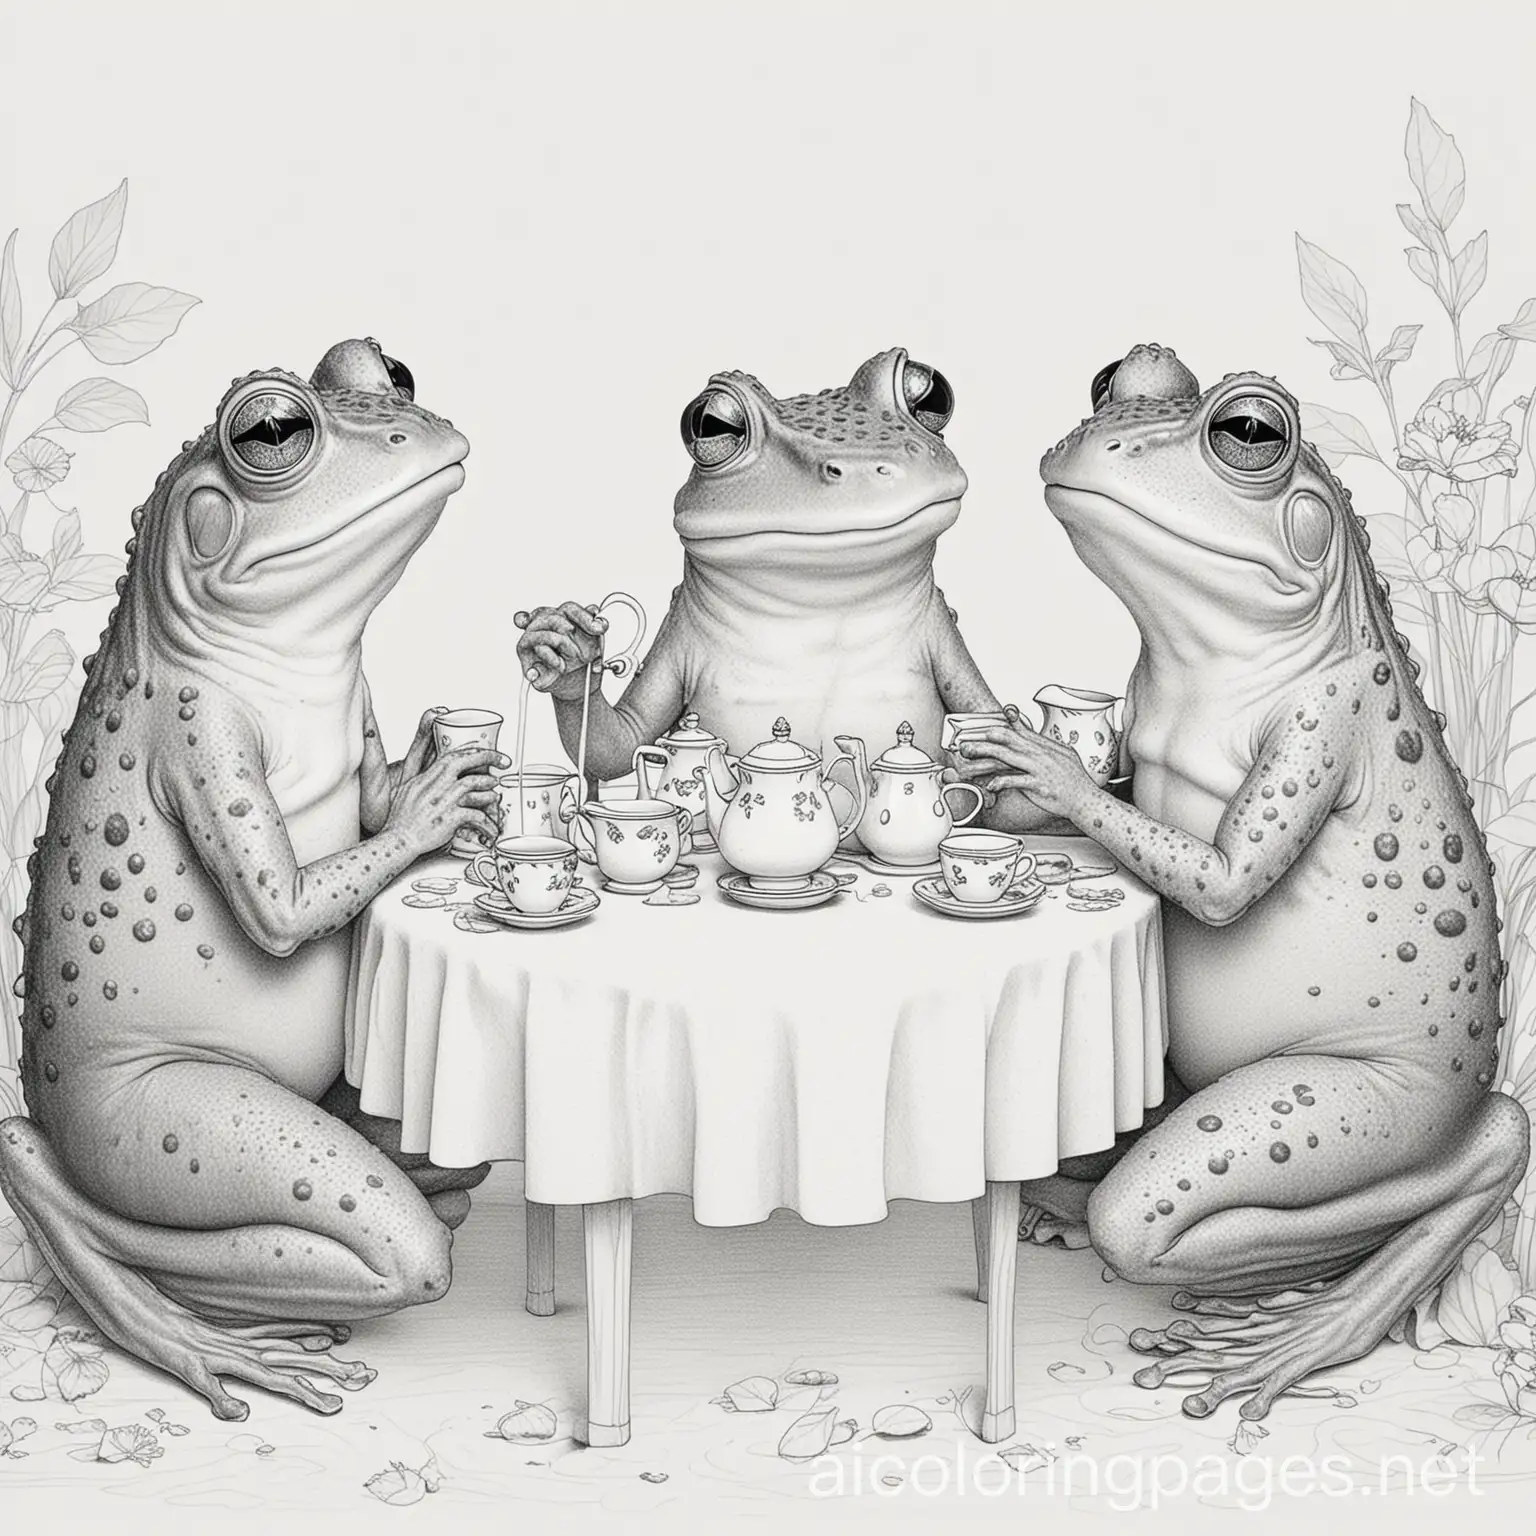 frogs drinking tea at the afternoon tea party, Coloring Page, black and white, line art, white background, Simplicity, Ample White Space. The background of the coloring page is plain white to make it easy for young children to color within the lines. The outlines of all the subjects are easy to distinguish, making it simple for kids to color without too much difficulty